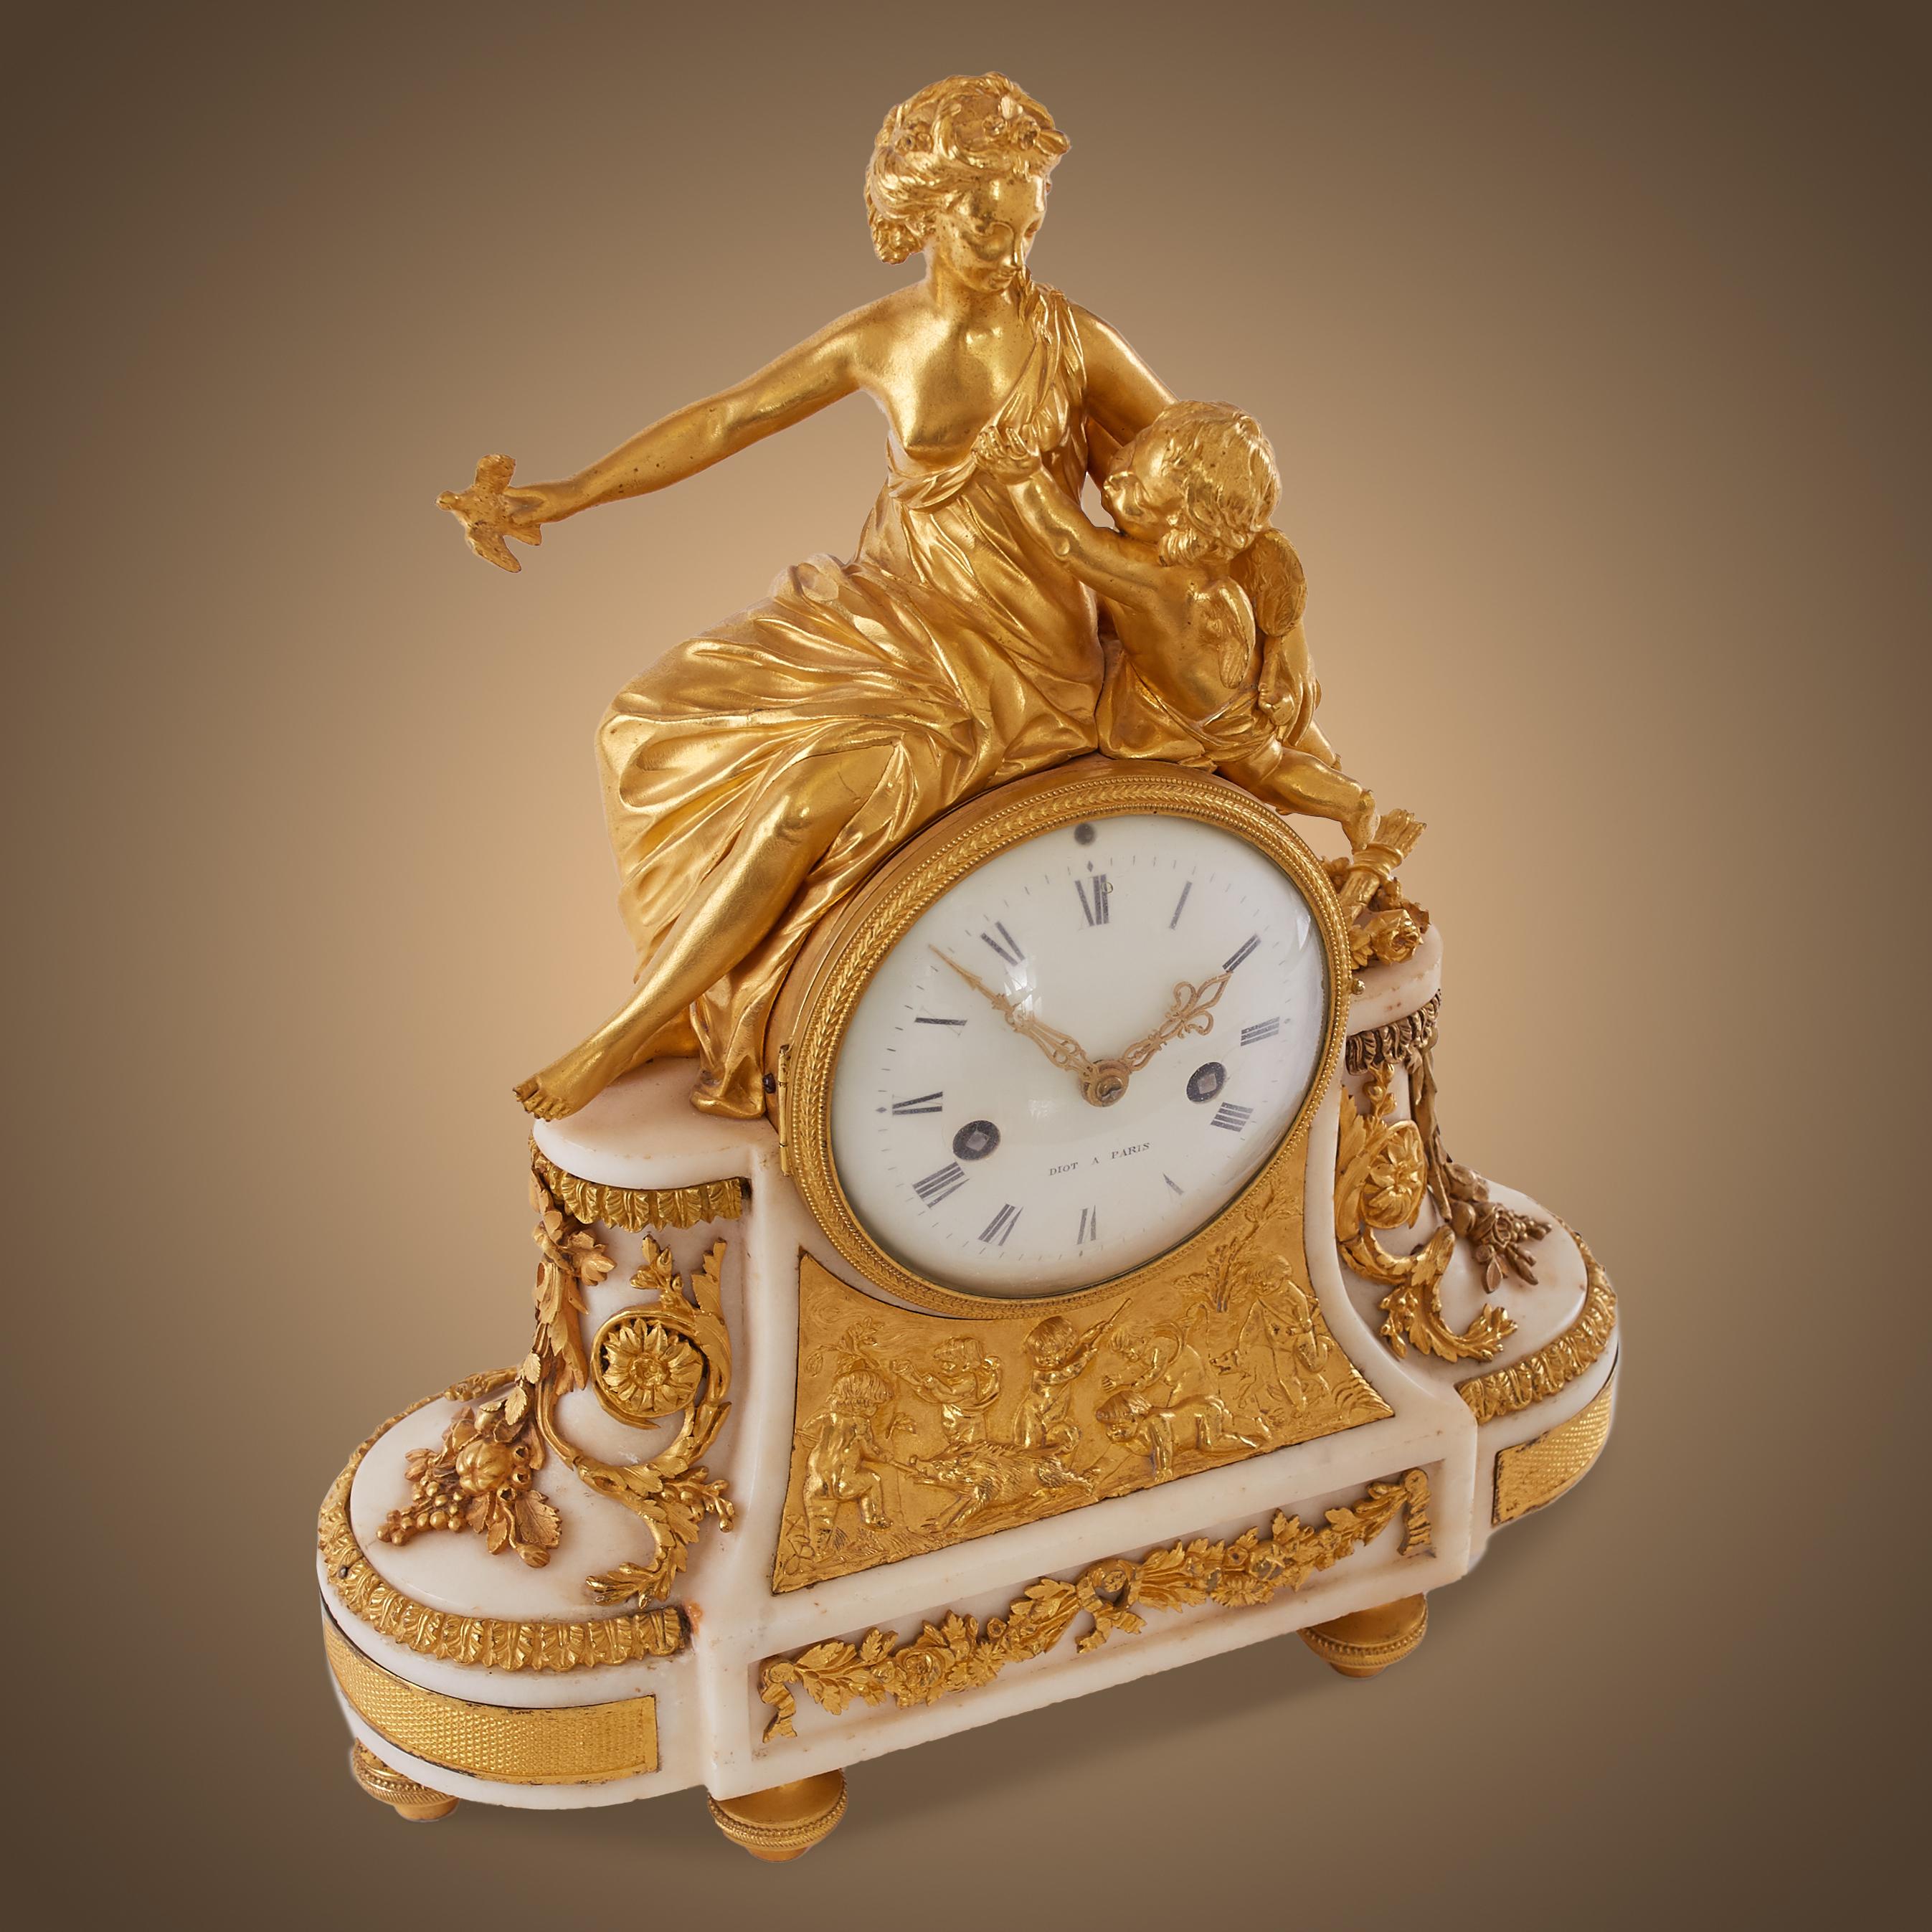 The Ancient Roman personifications of love and desire, Venus and Cupid, feature on this this fantastic Louis XVI mantel clock. Finely cast in resplendent gilt bronze, they are shown with a dove on Venus's hand, another ancient symbol of love. Venus